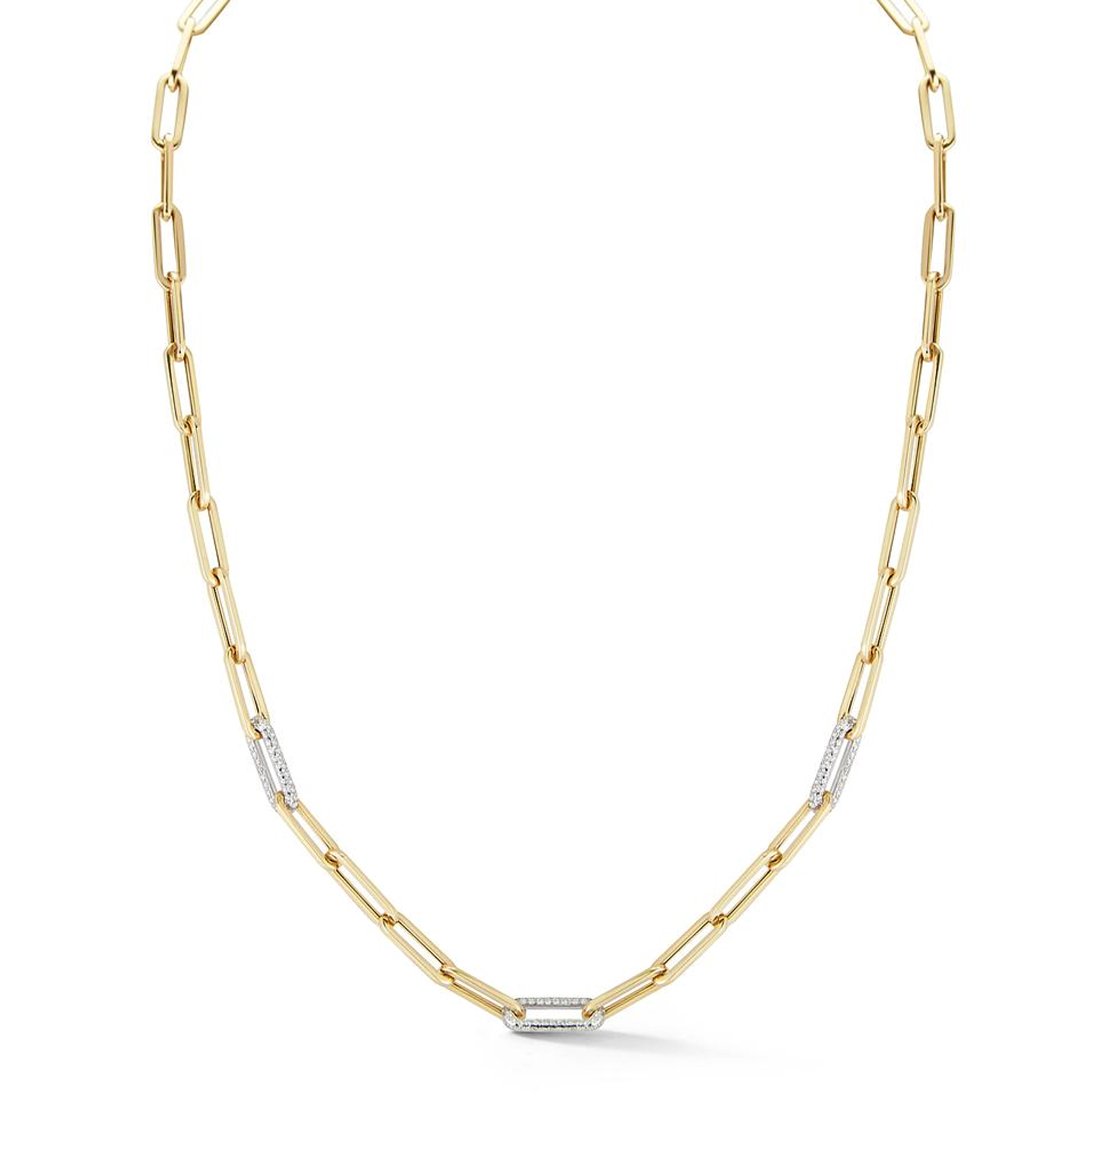 Beny Sofer 14kt Two Tone Paperclip Gold Link Necklace with 3 Diamond Pave Links